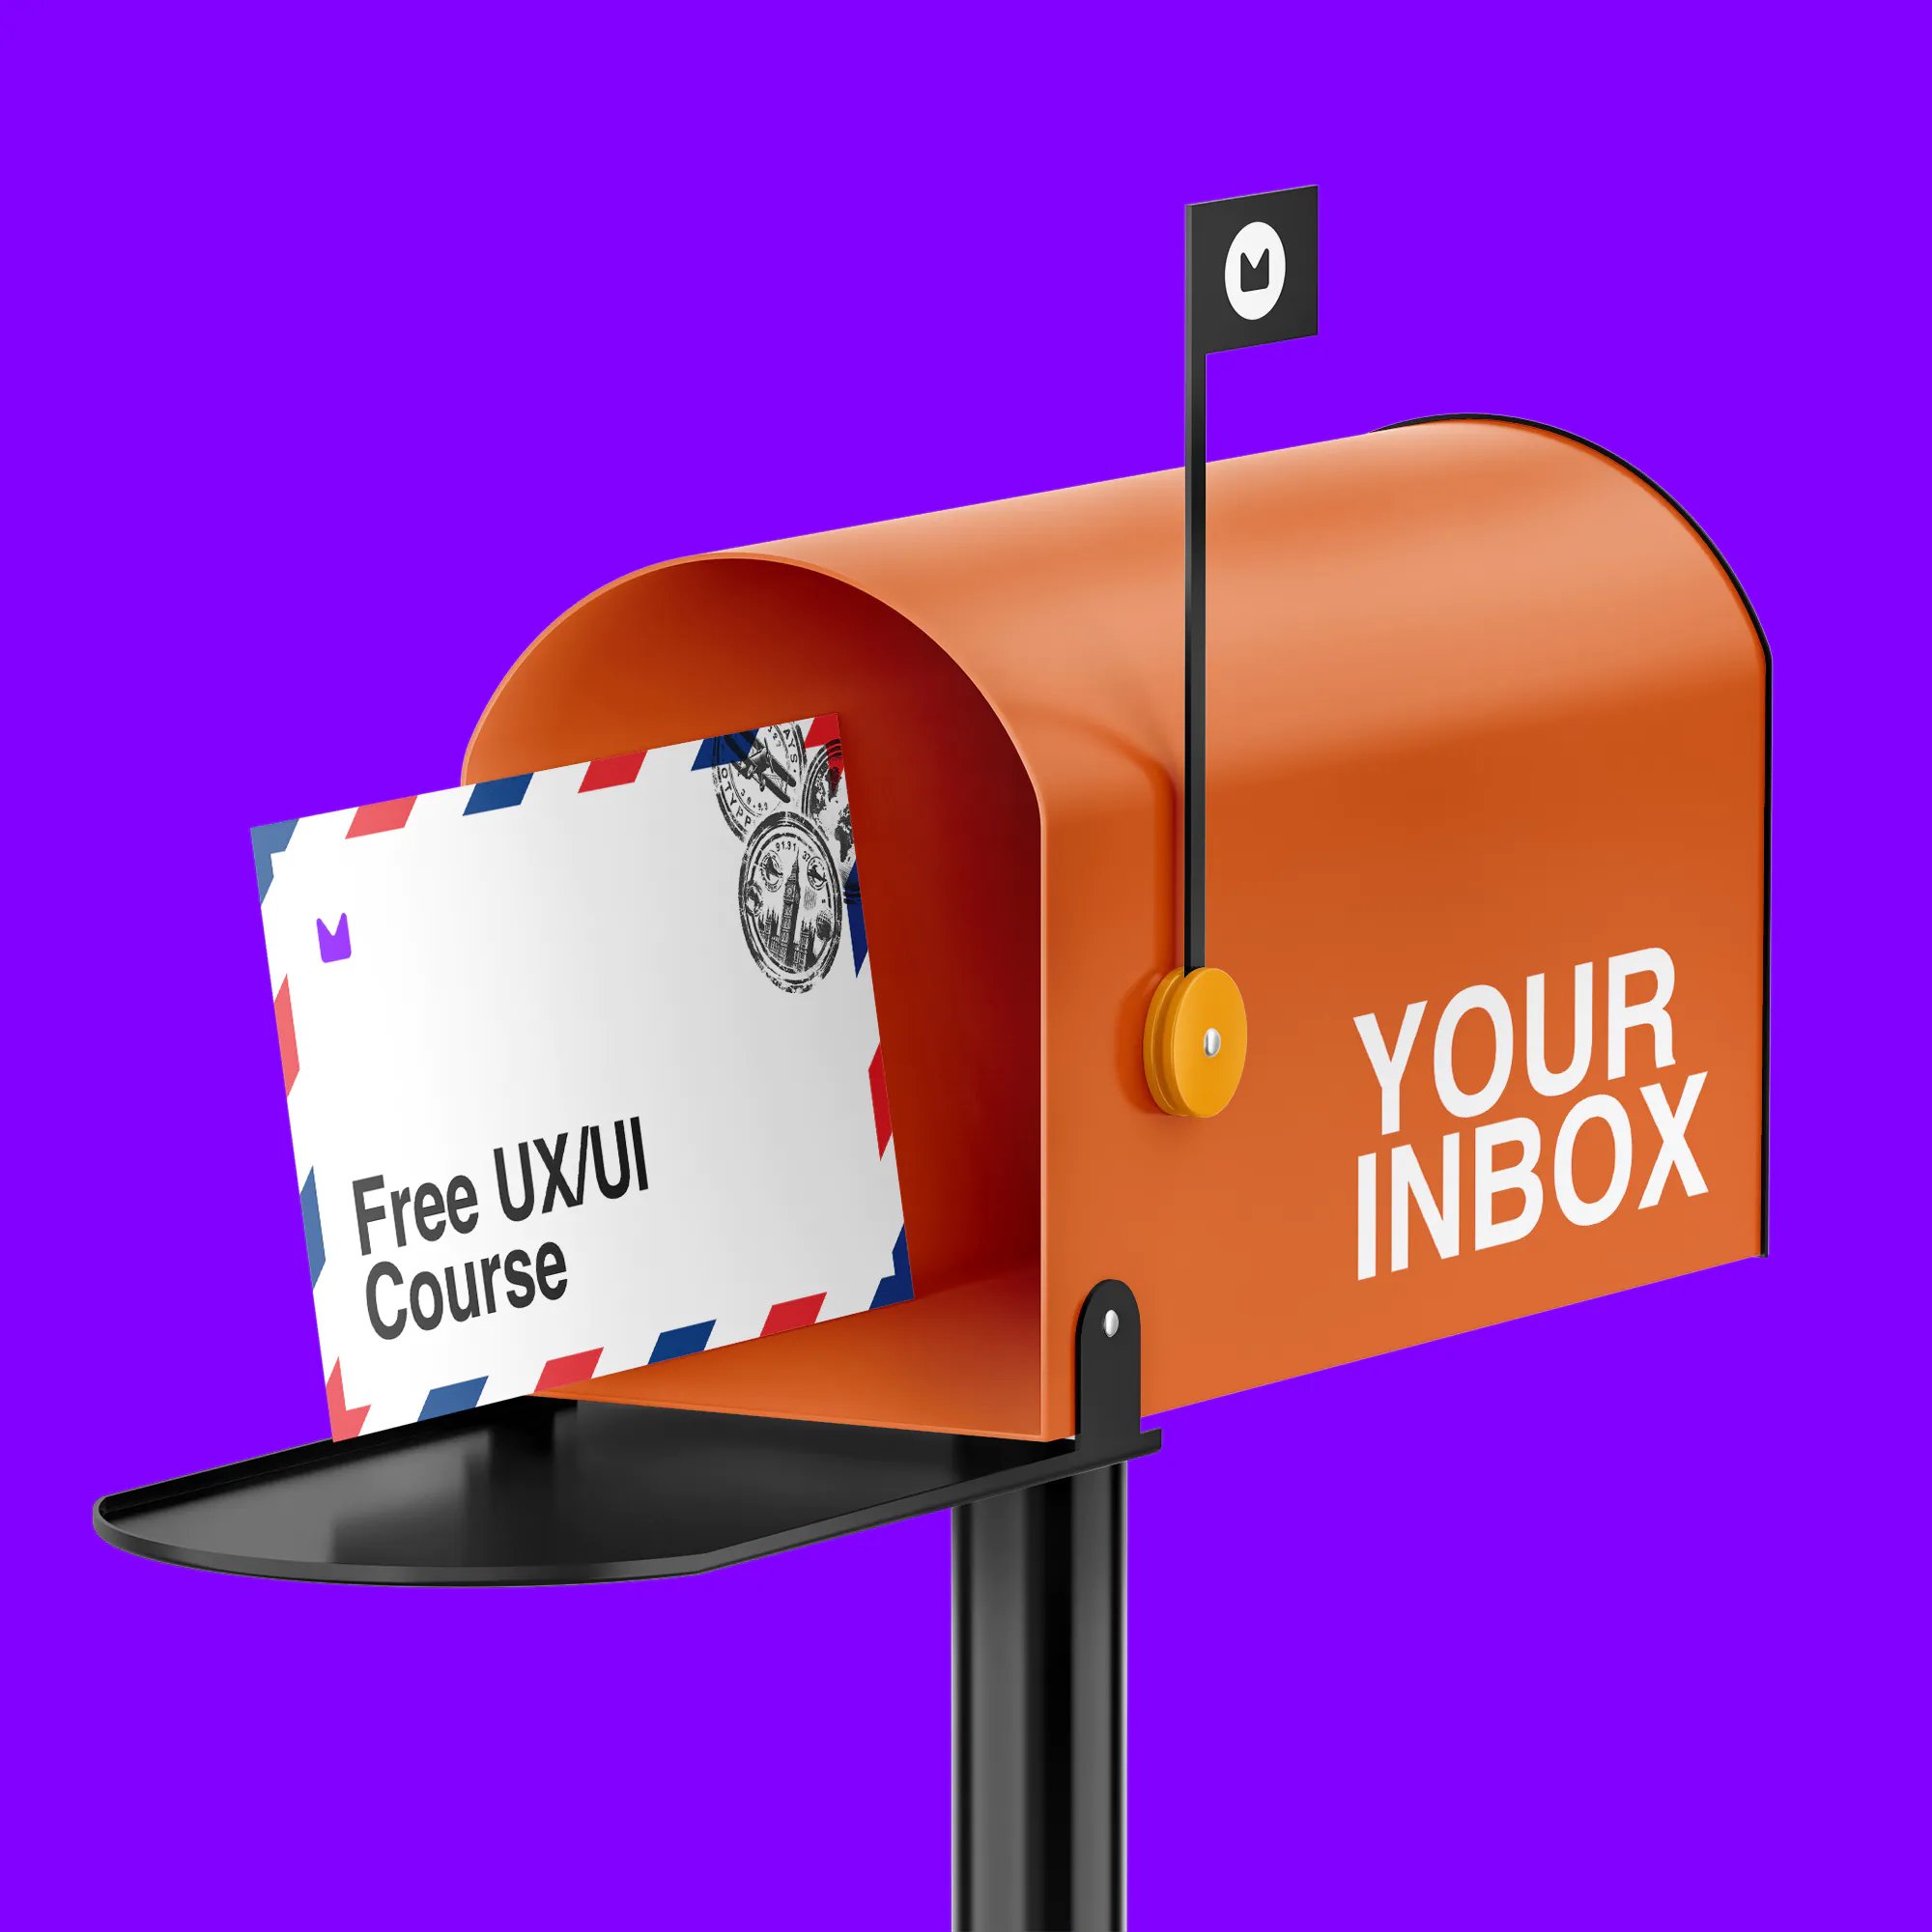 Image depicting a mailbox receiving a free UX/UI course letter